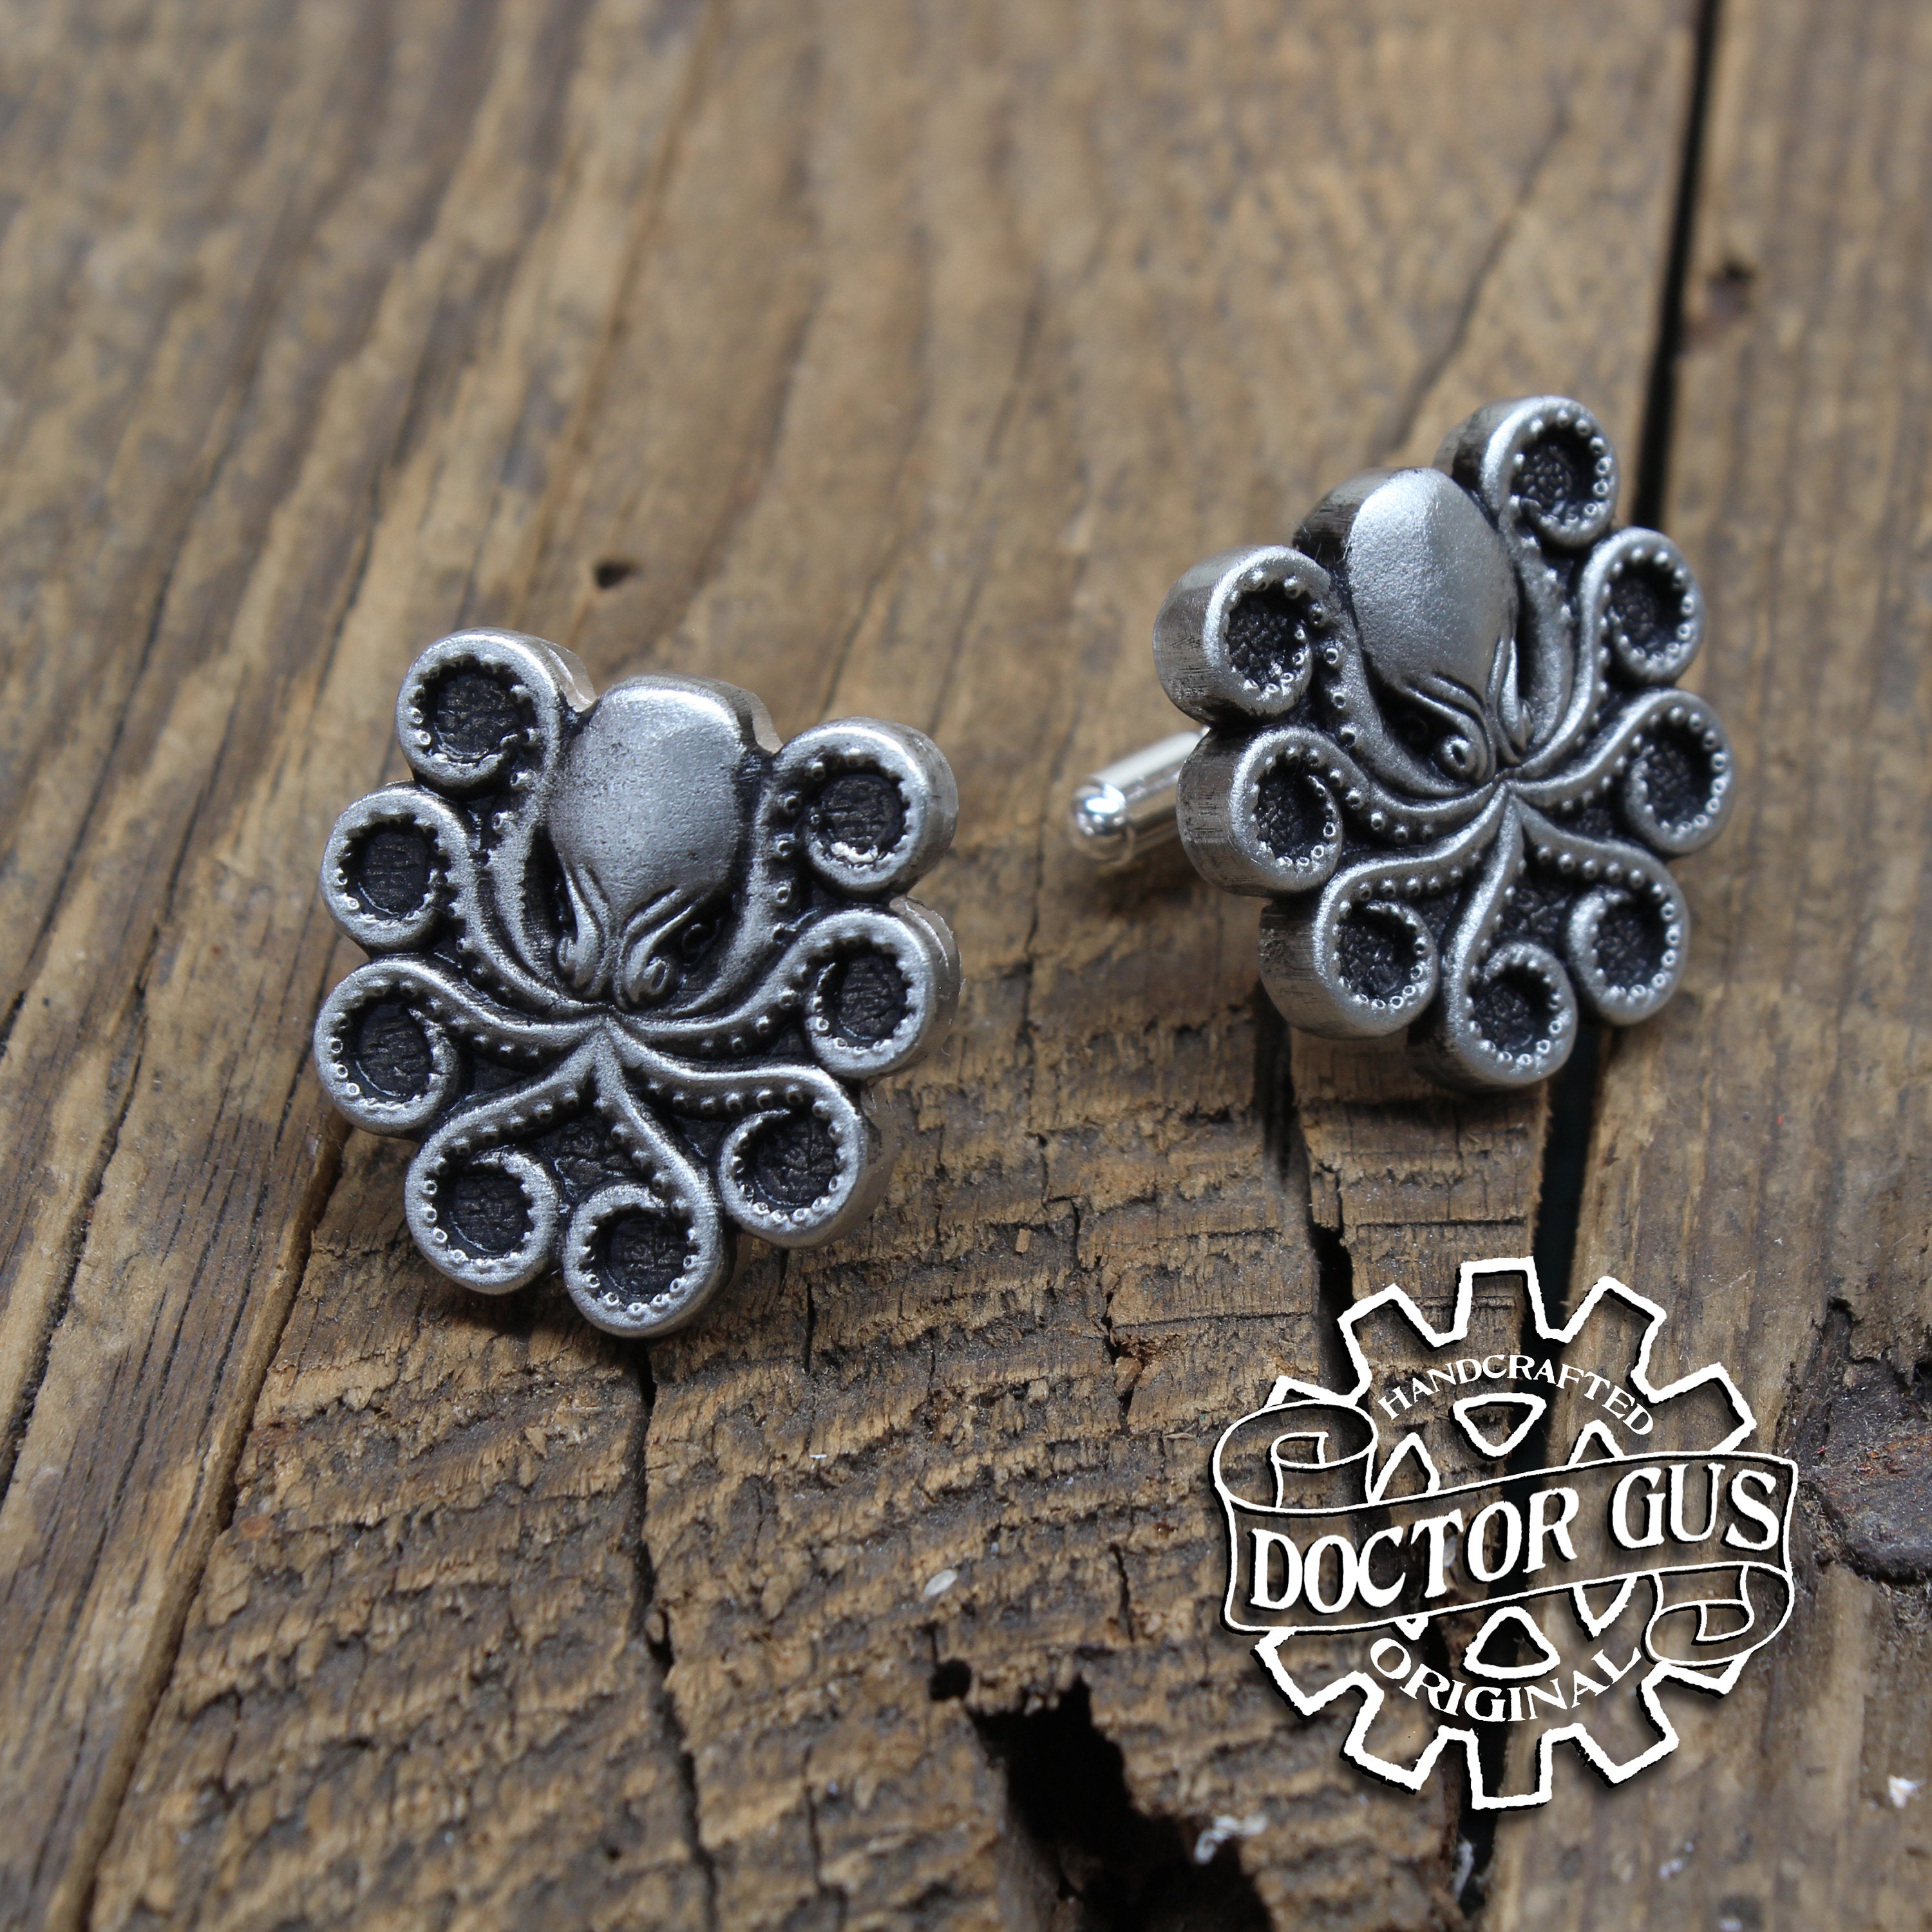 Octopus Cuff Links - Tentacle Cephalopod Accessories by Doctor Gus - Suit and Tie - Men's Gifts - Cthulhu Lovecraft Steampunk Wedding Groom